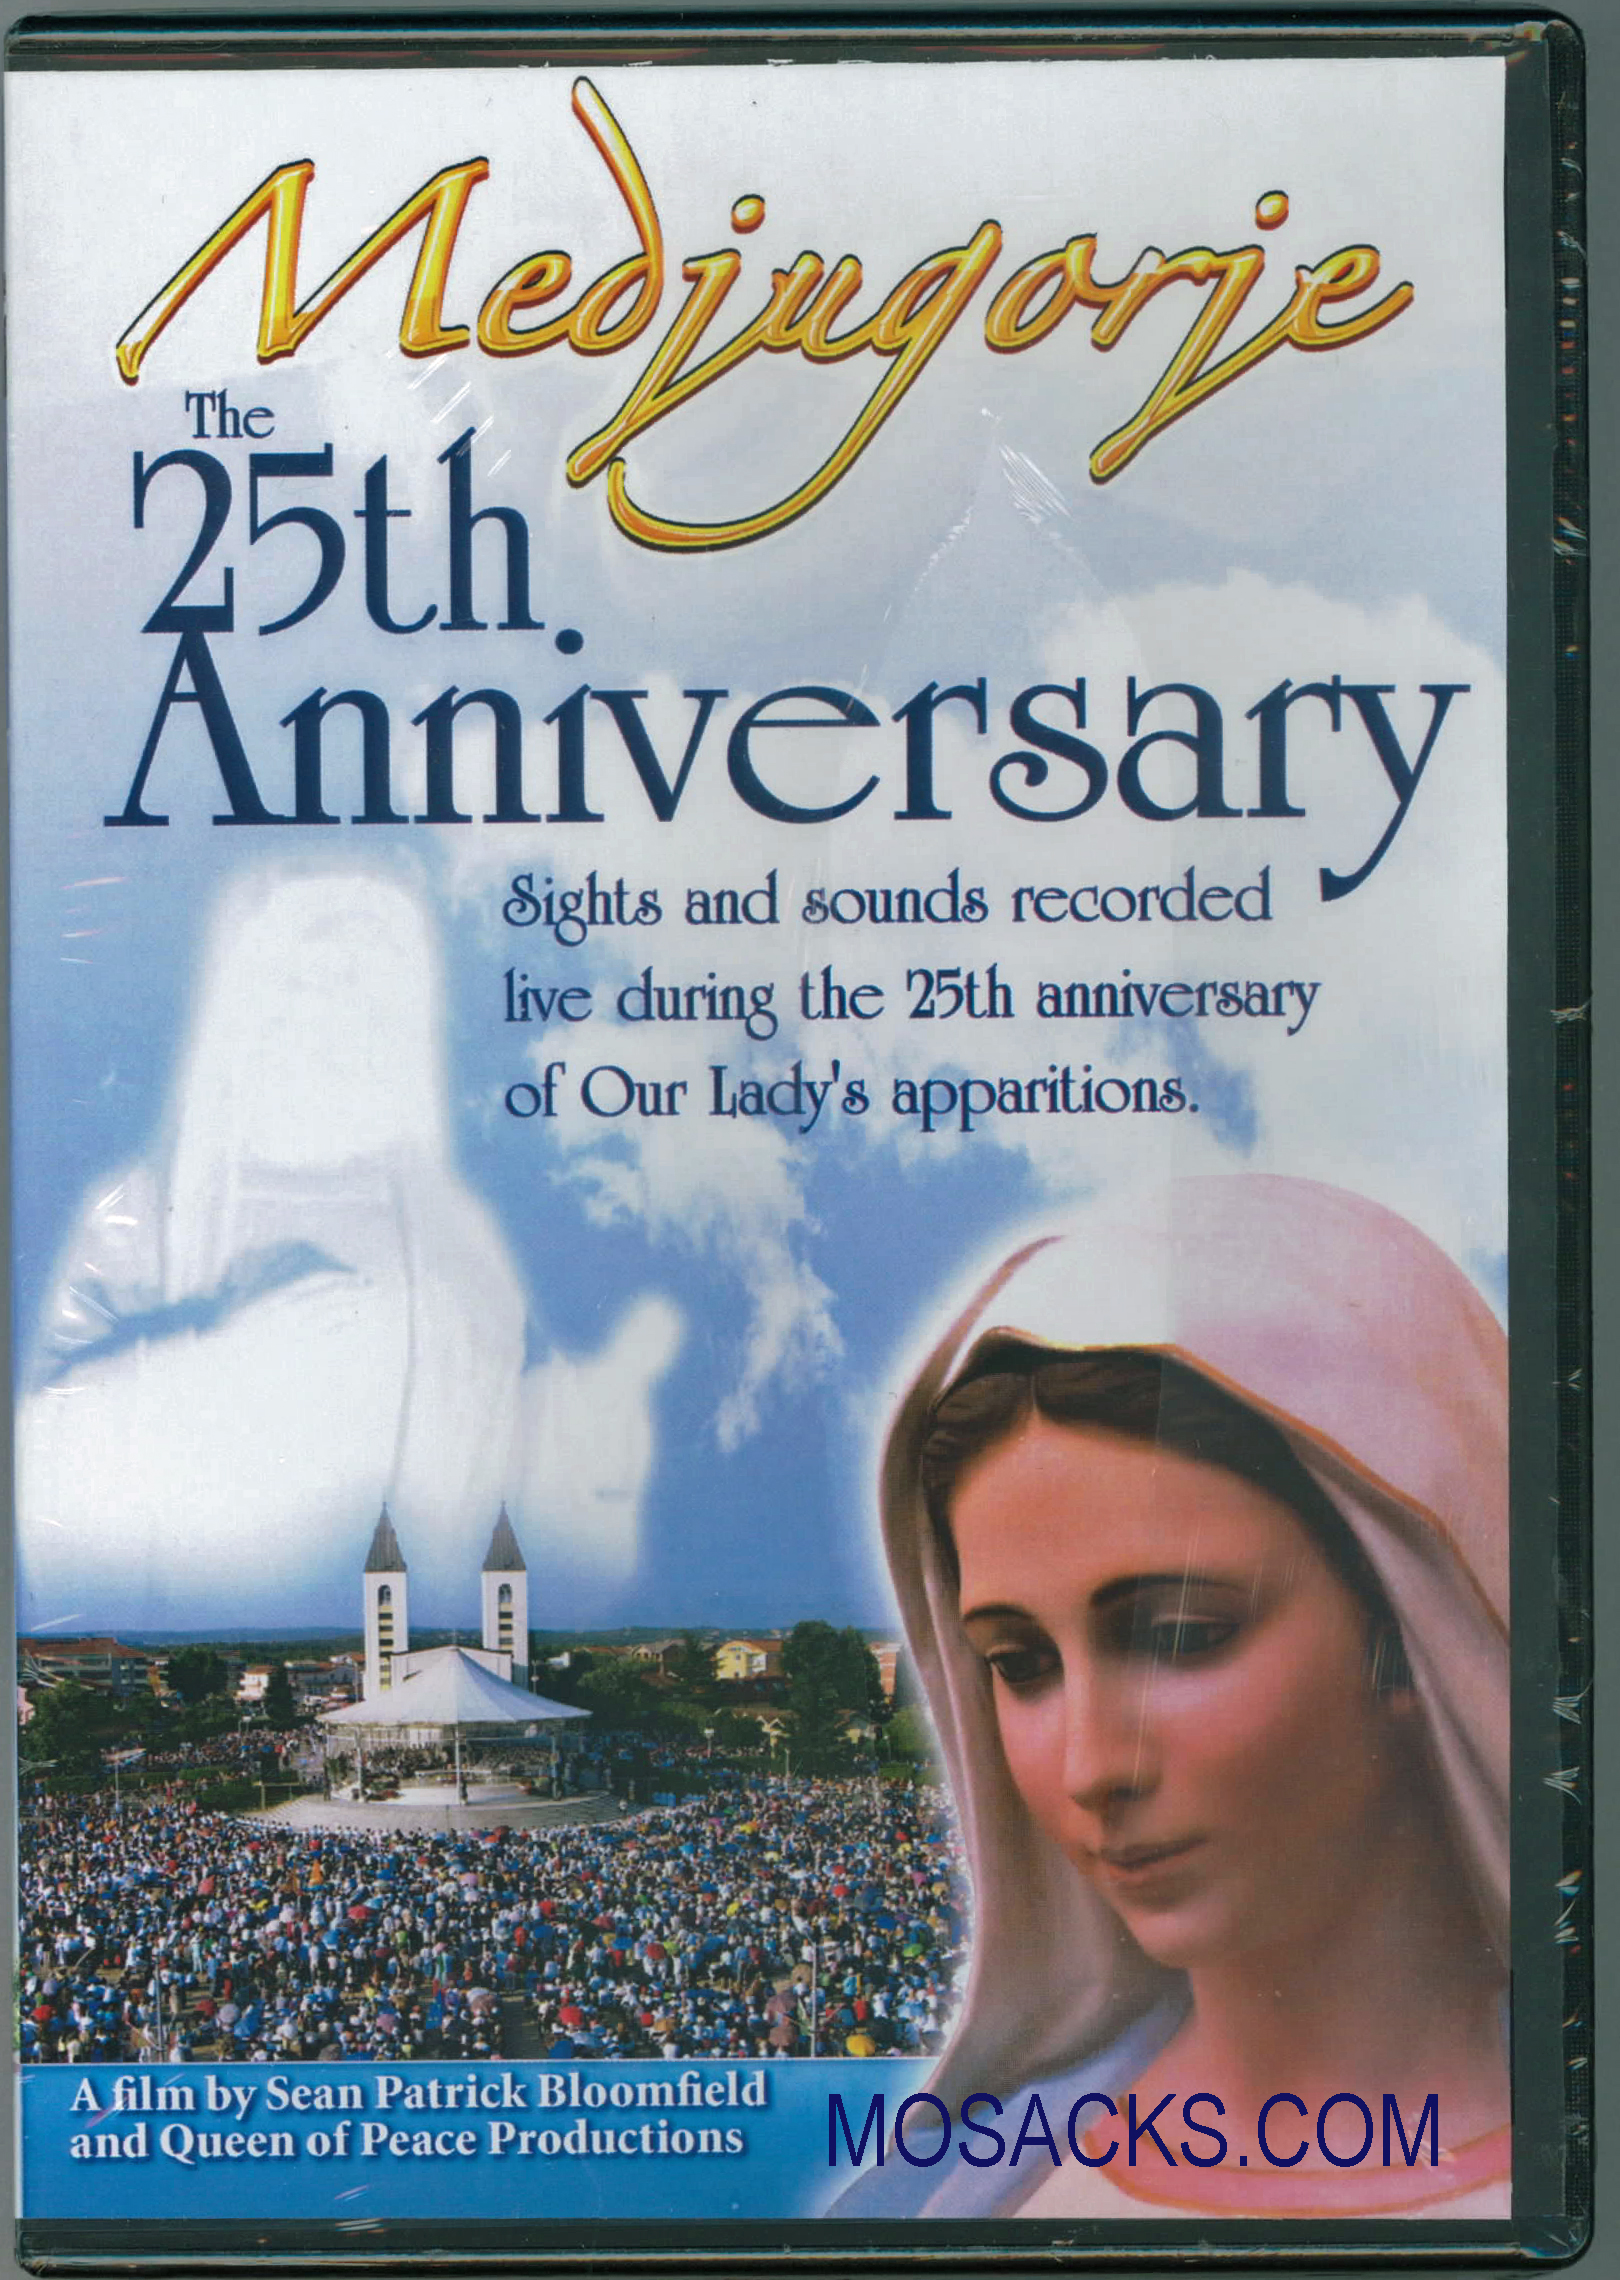 Medjugorje-The 25th Anniversary on DVD from Queen of Peace Productions 463-QOPP4